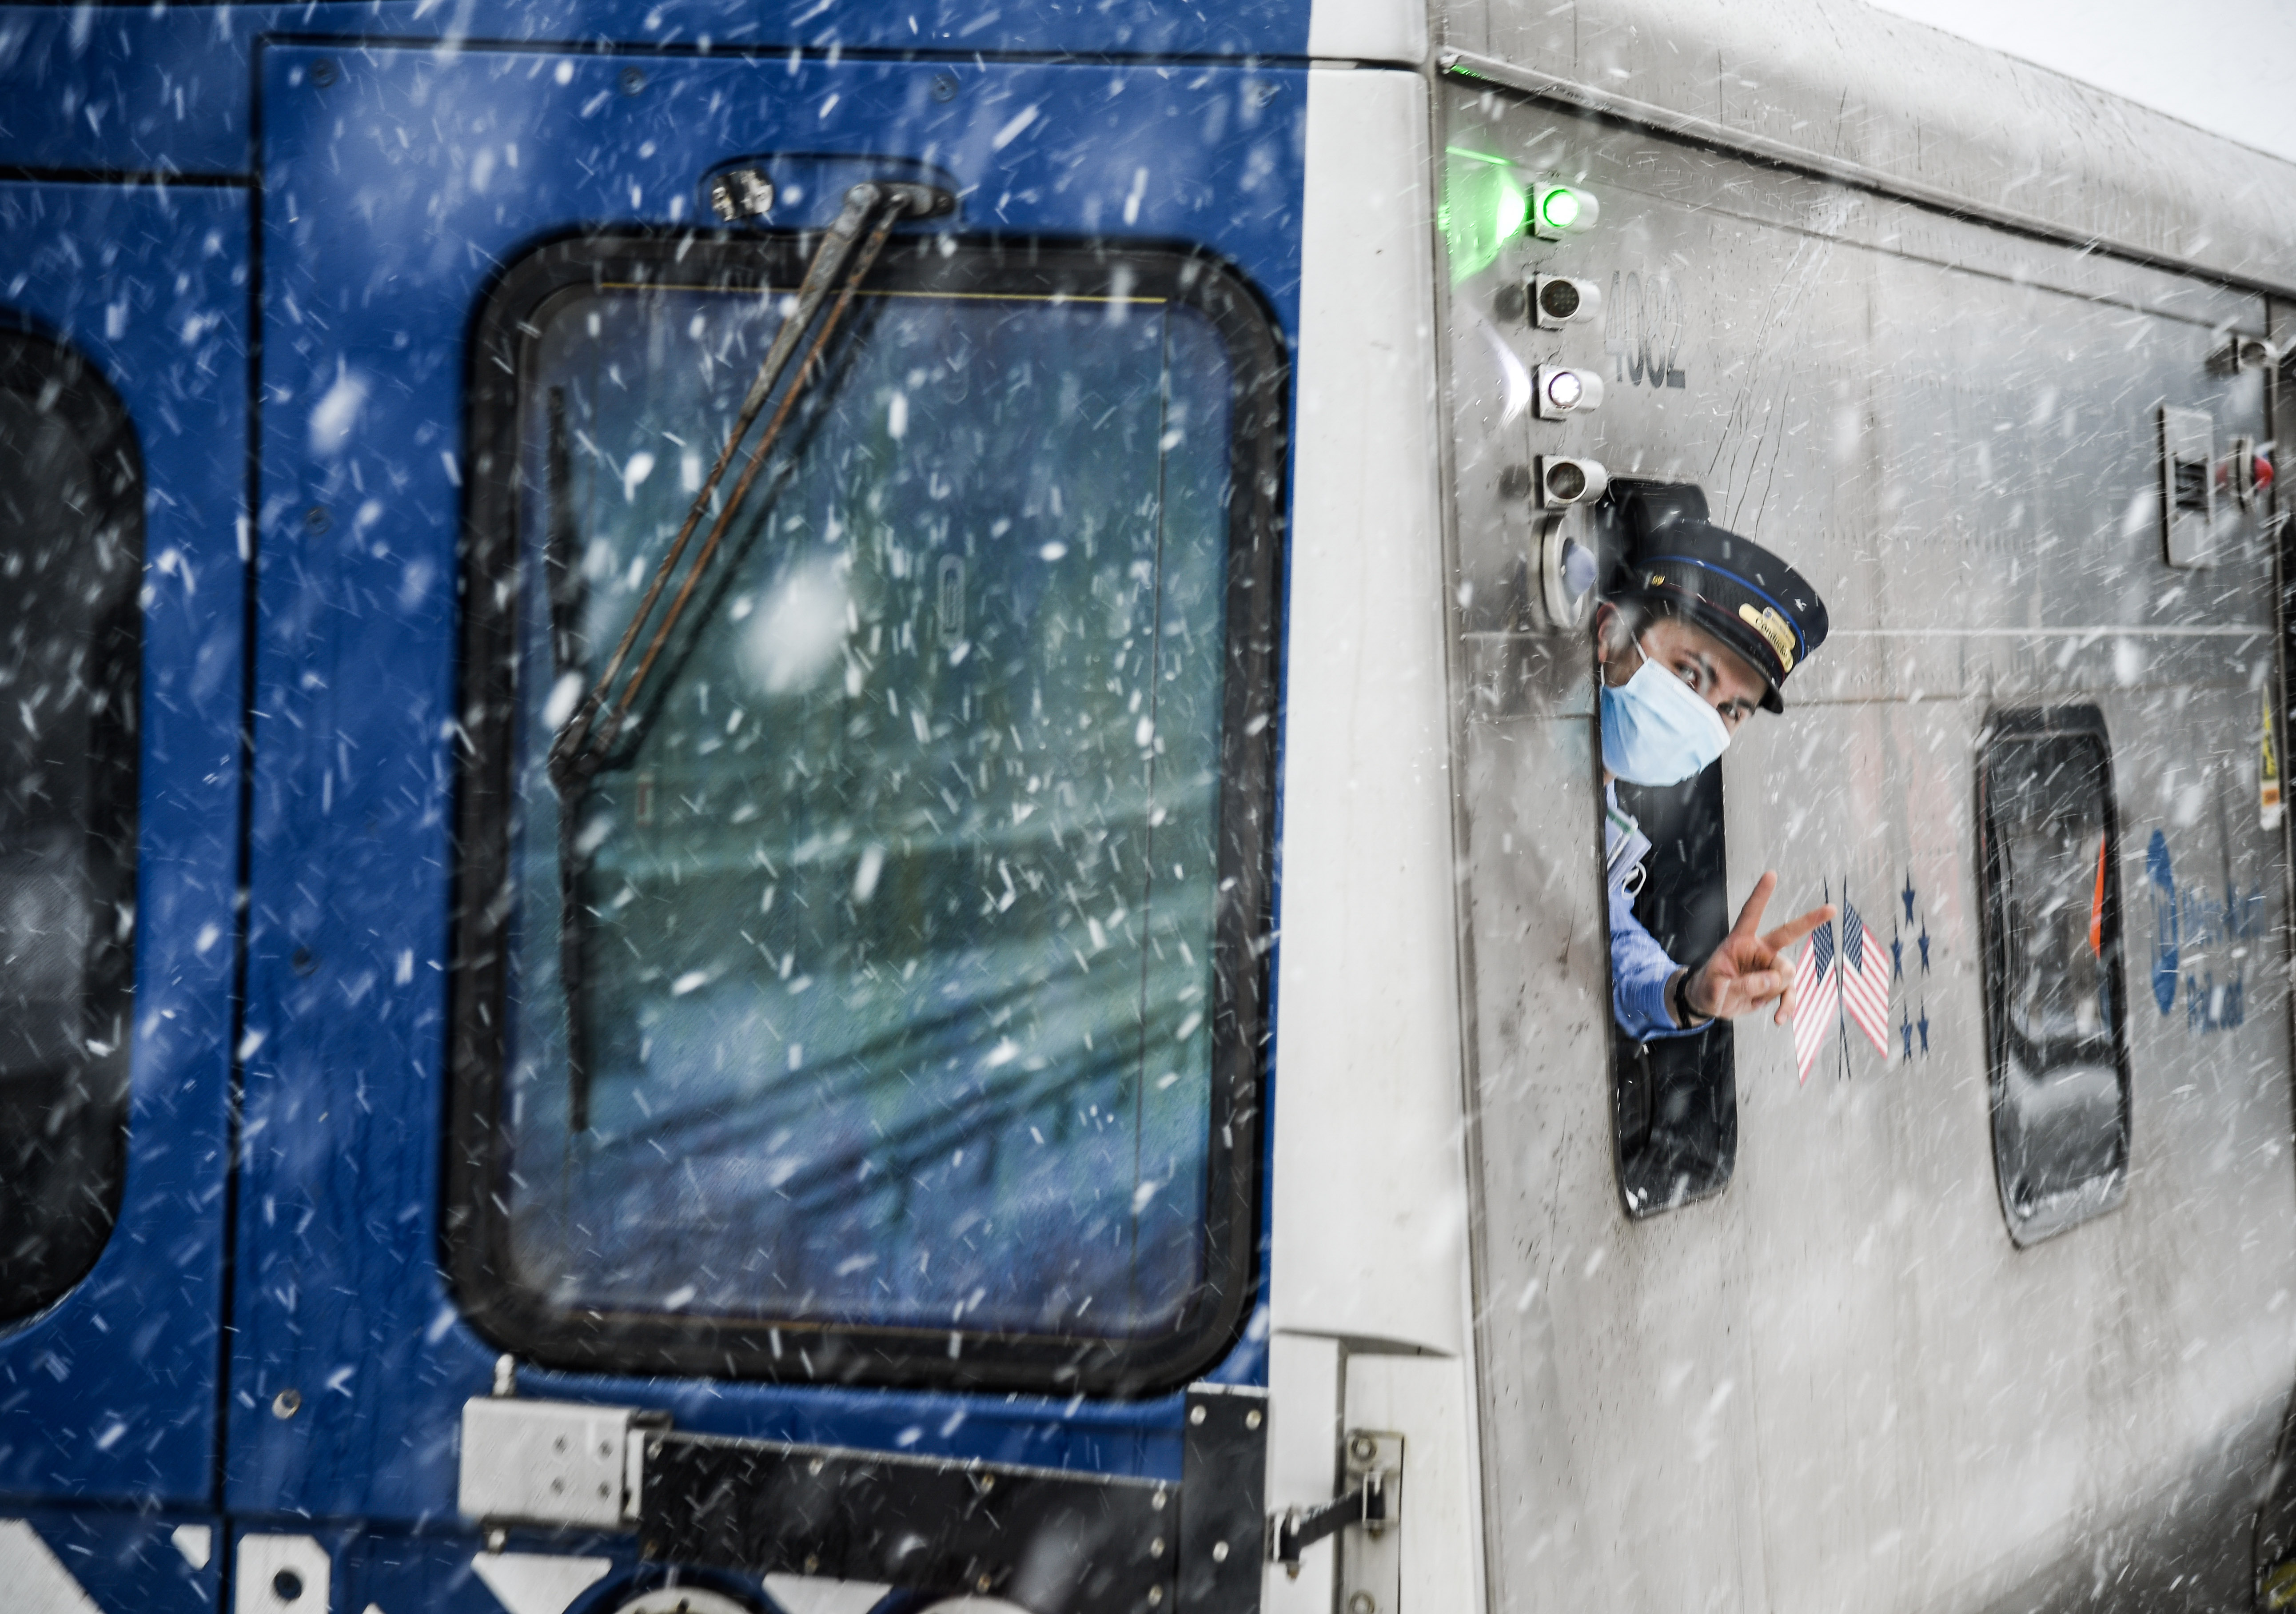 an mta employee on a train during a snowstorm